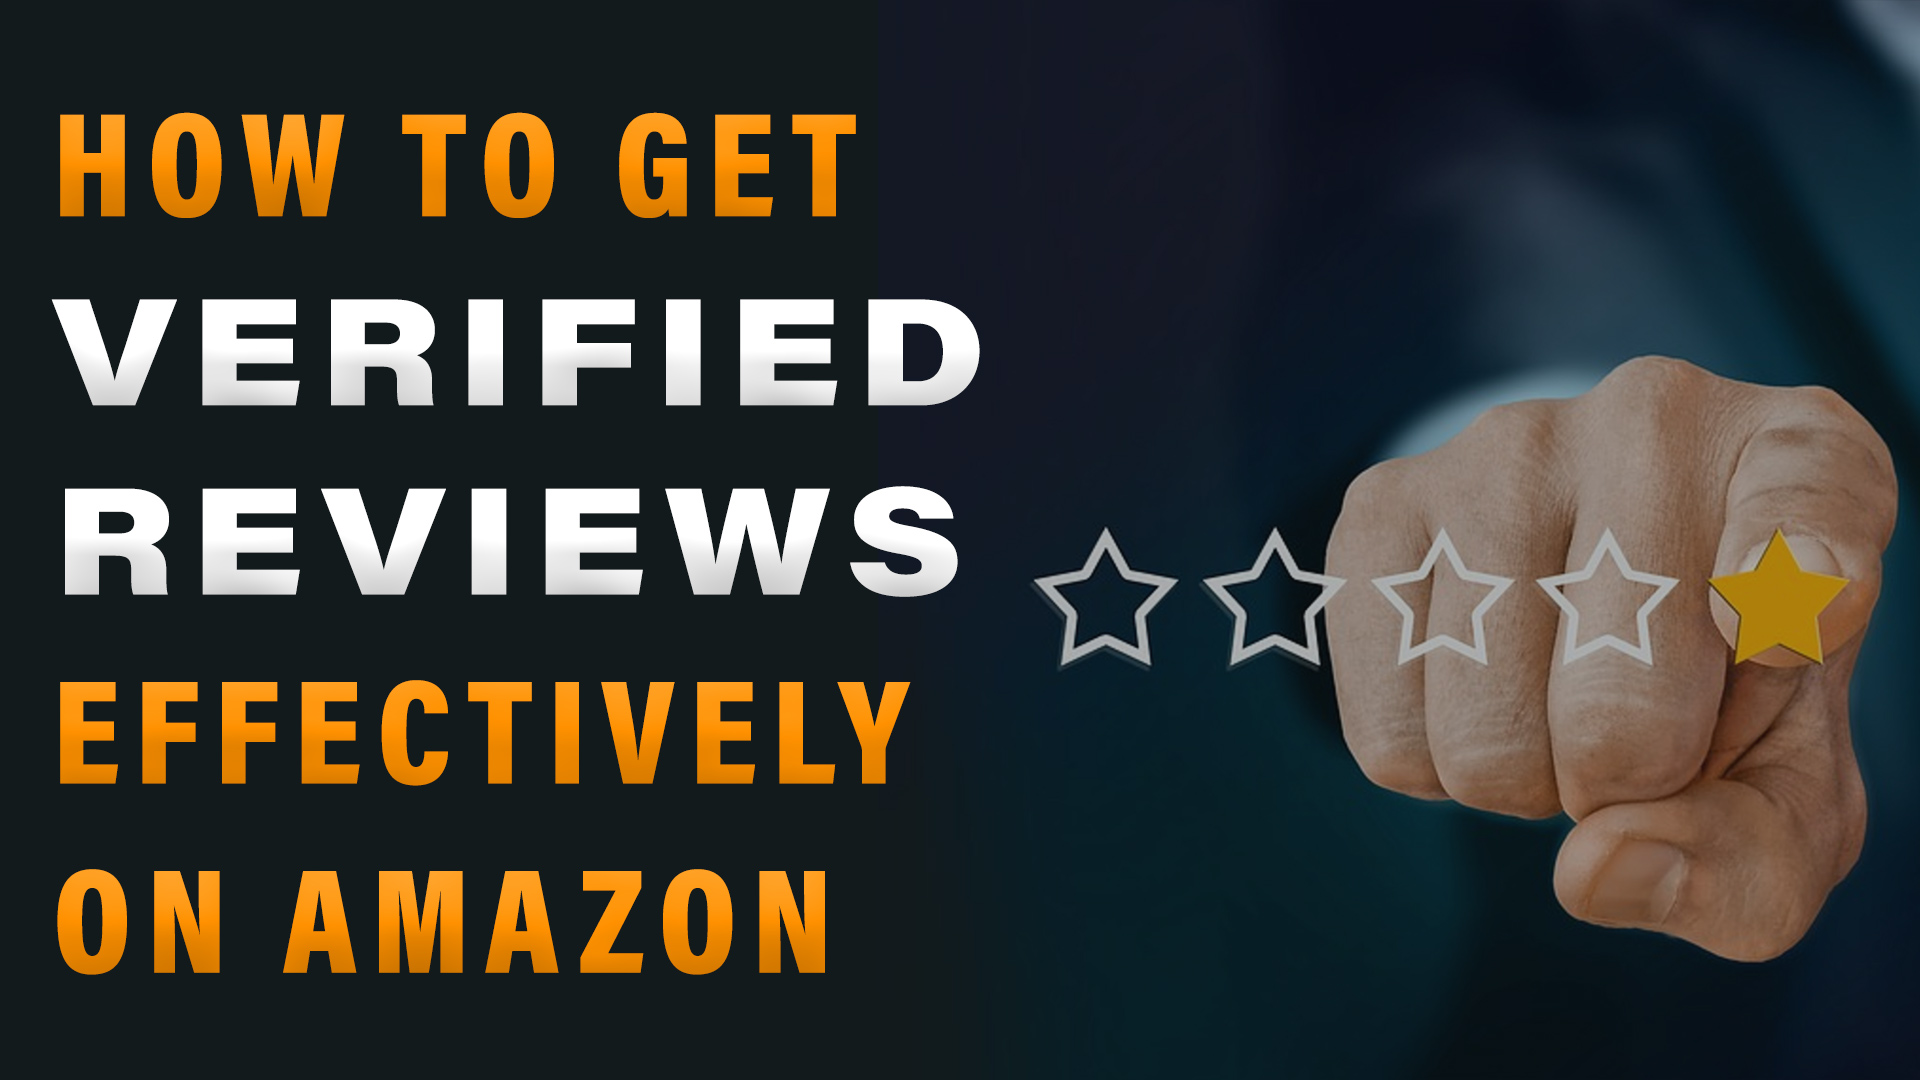 How to Get Verified Reviews Effectively on Amazon